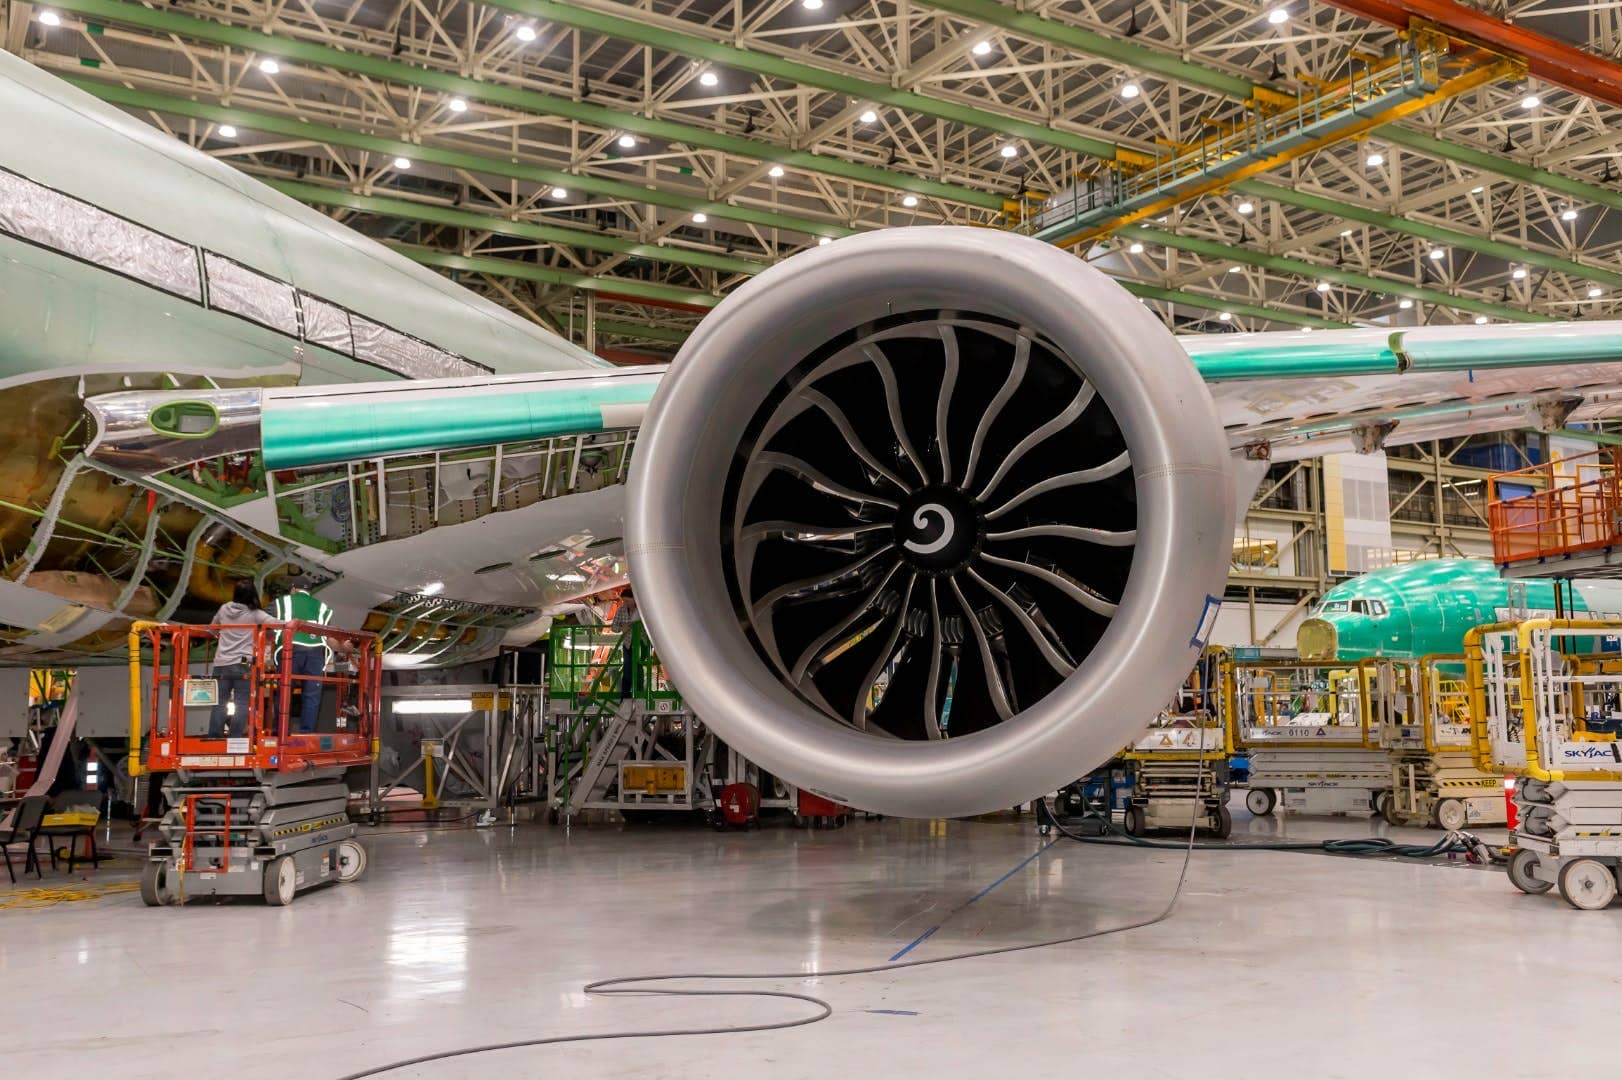 Boeing 777X Features World's Largest Engine, GE9X!